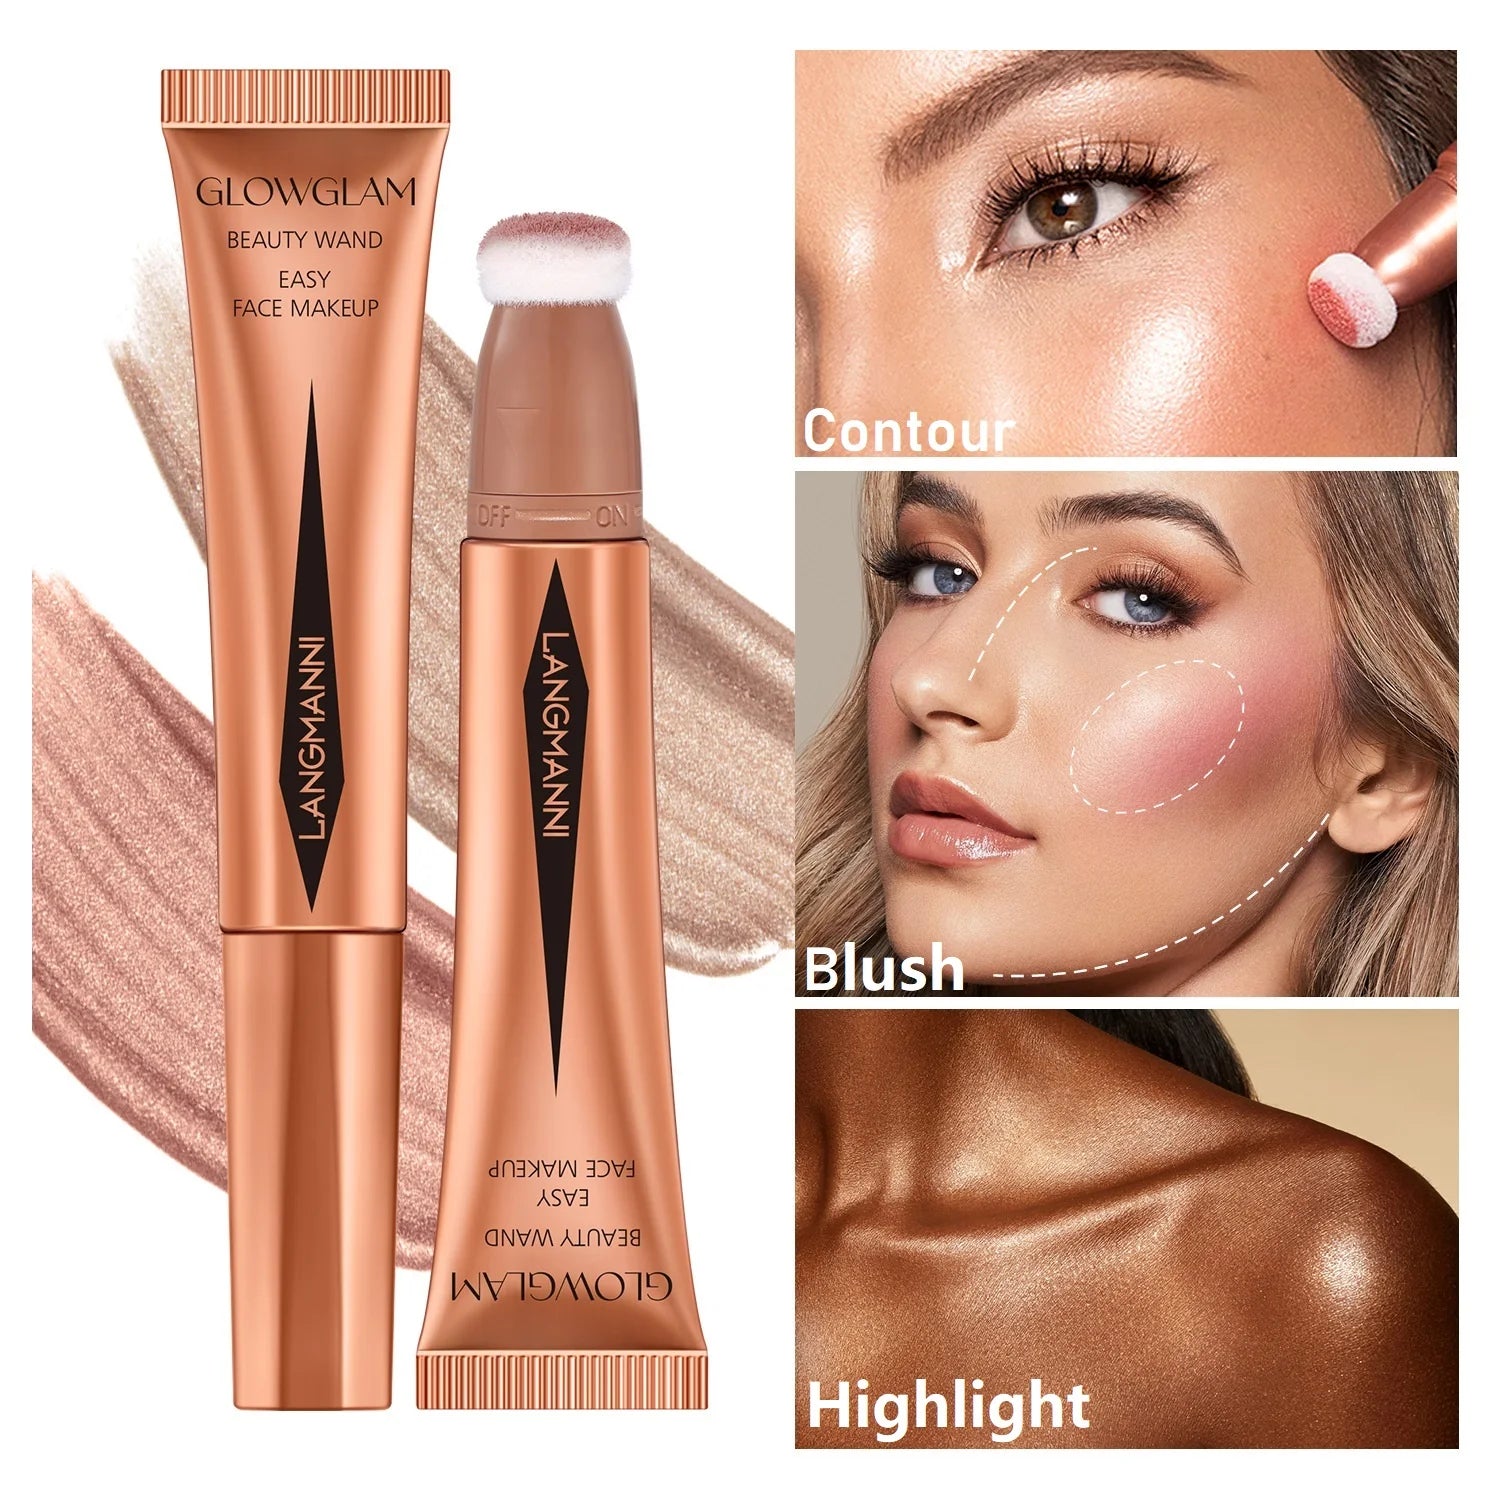 Blush Makeup Cheek Contour Highlight Face Cosmetic Blush Stick With Sponge Lasting Natural Liquid Blush Makeup For Women Product